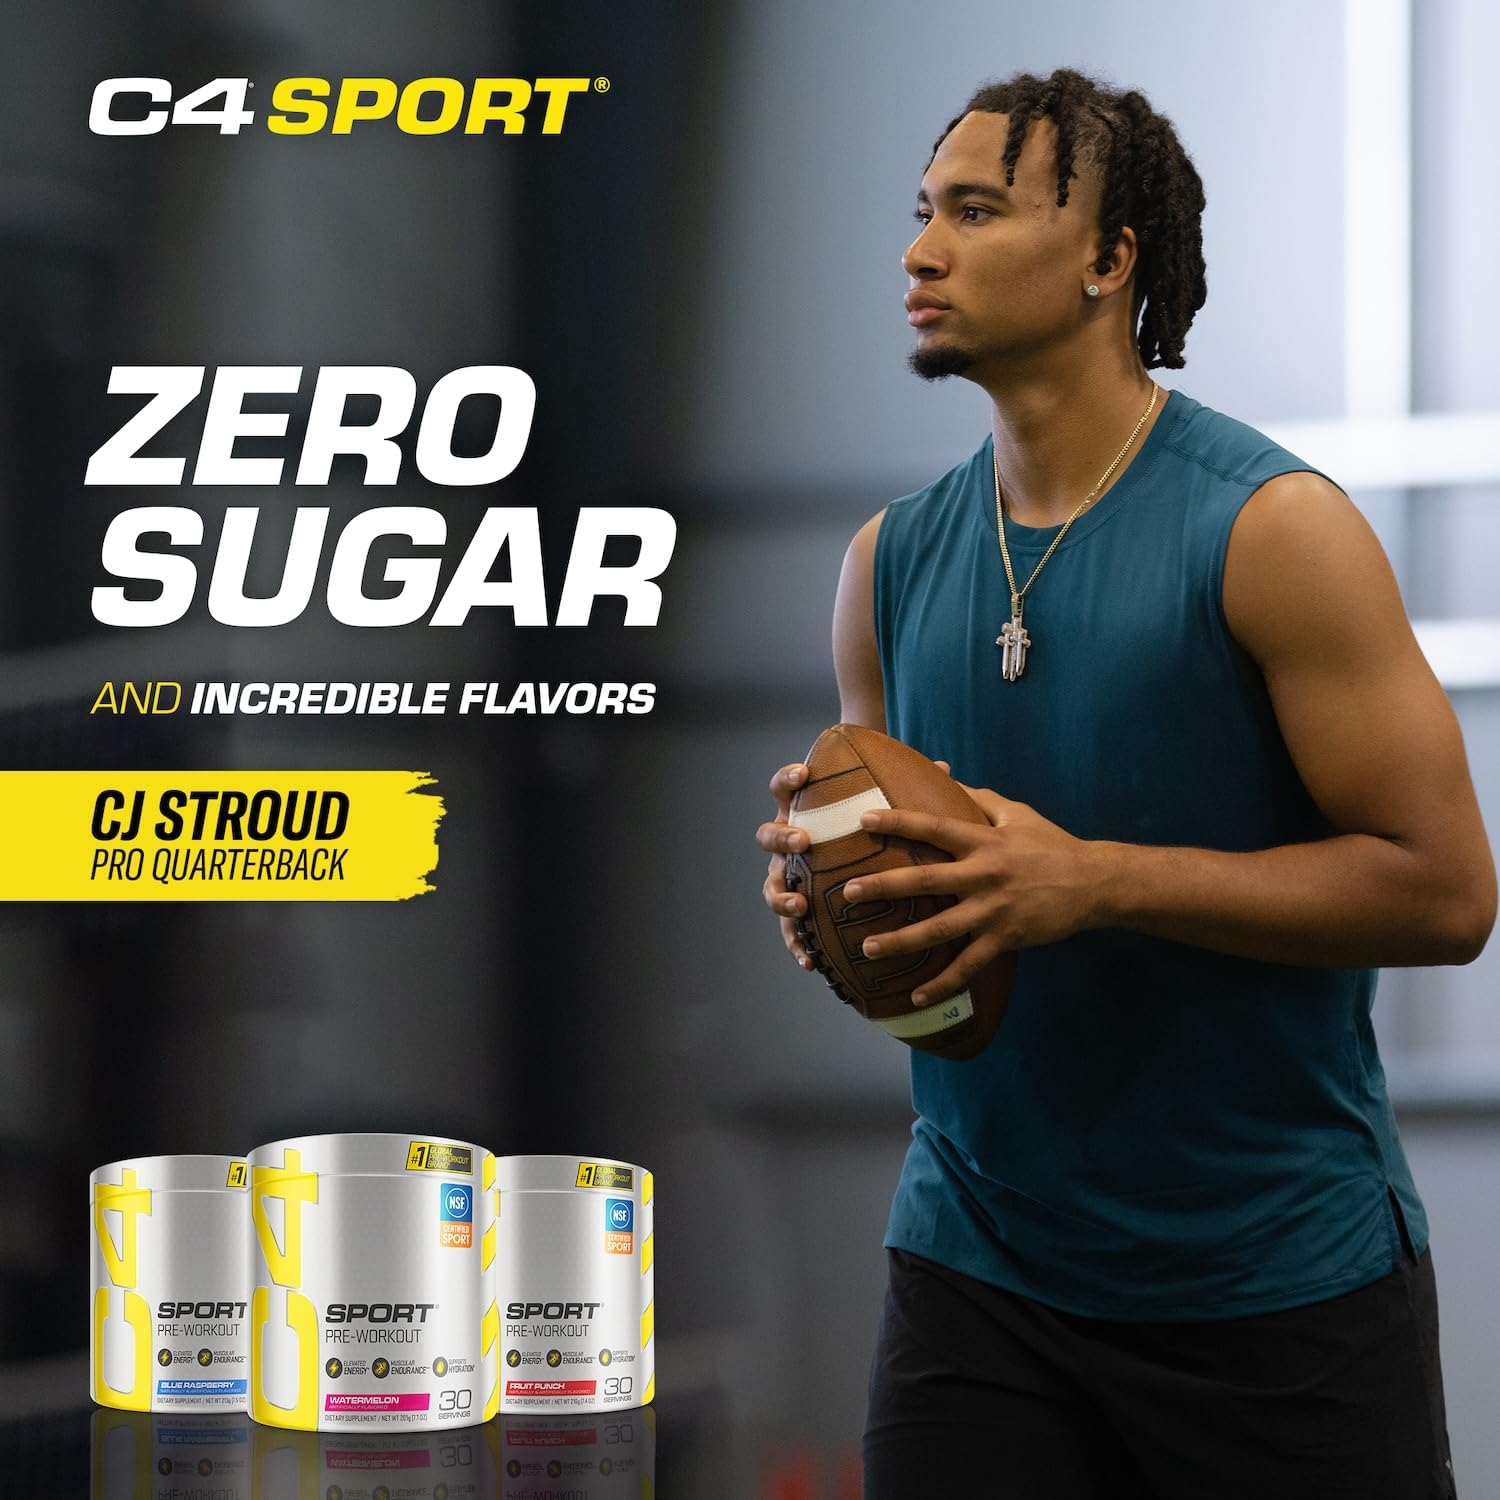 Cellucor C4 Sport Pre Workout Powder Blue Raspberry - Pre Workout Energy with Creatine + 135mg Caffeine and Beta-Alanine Performance Blend - NSF Certified for Sport 30 Servings : Health & Household